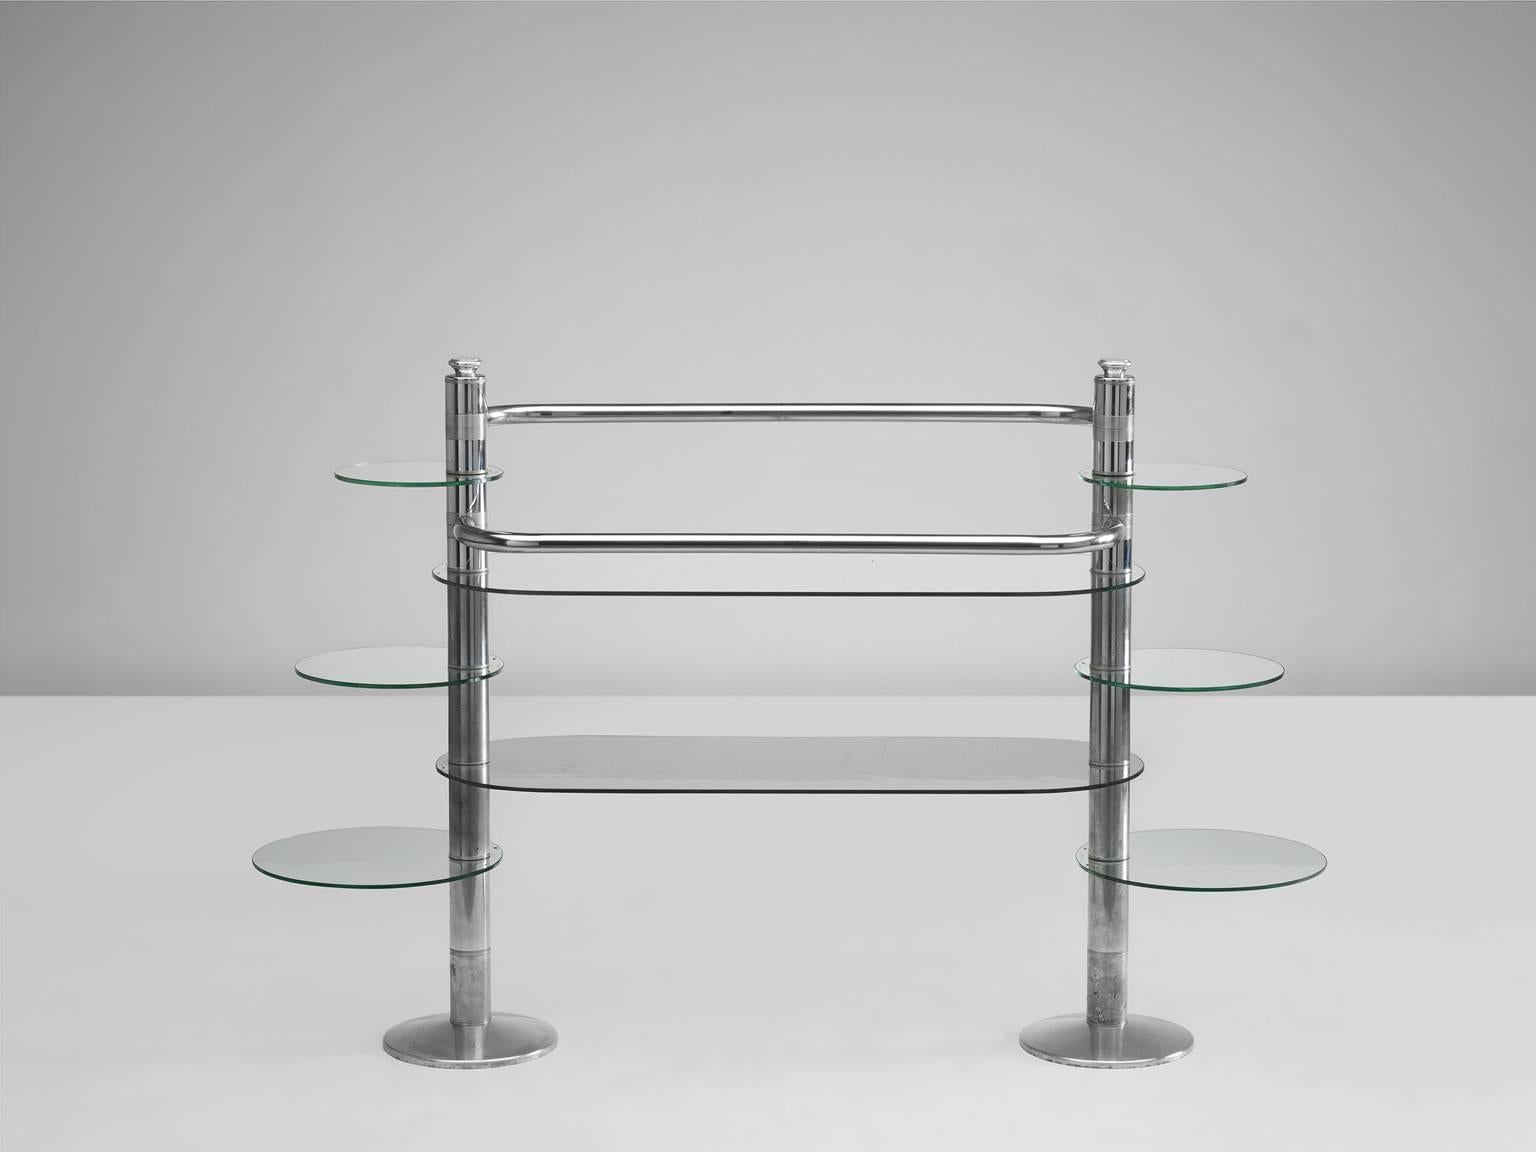 Freestanding display unit in chrome and glass, Italy, 1980s.

This playful display unit has two large glass shelfs and six small round shelfs, three on each side. The small shelfs on the sides differ in size and swivel, which makes it practical as